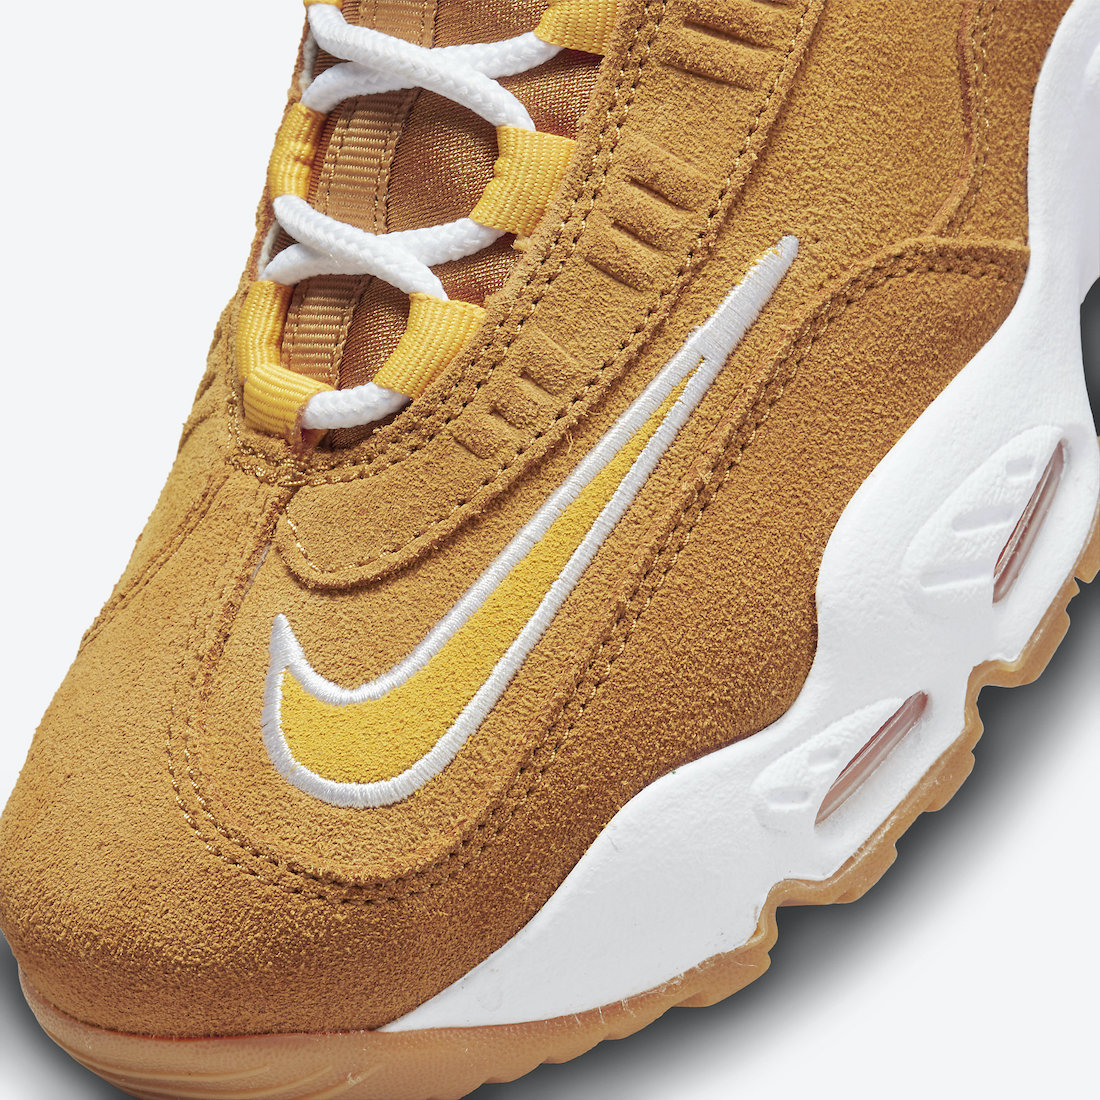 Nike Air Griffey Max 1 Wheat GS DO6685-700 Release Date